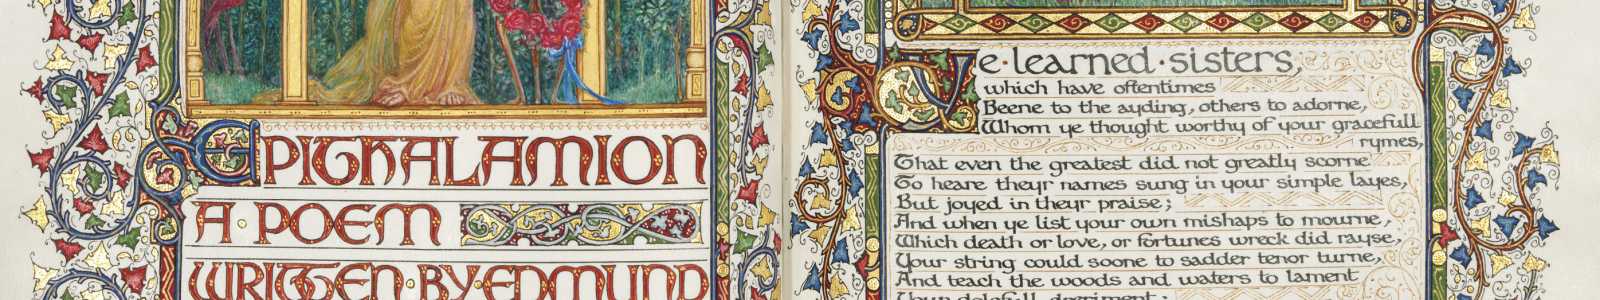 Books, Manuscripts, Photographs: From the Middle Ages to the Moon